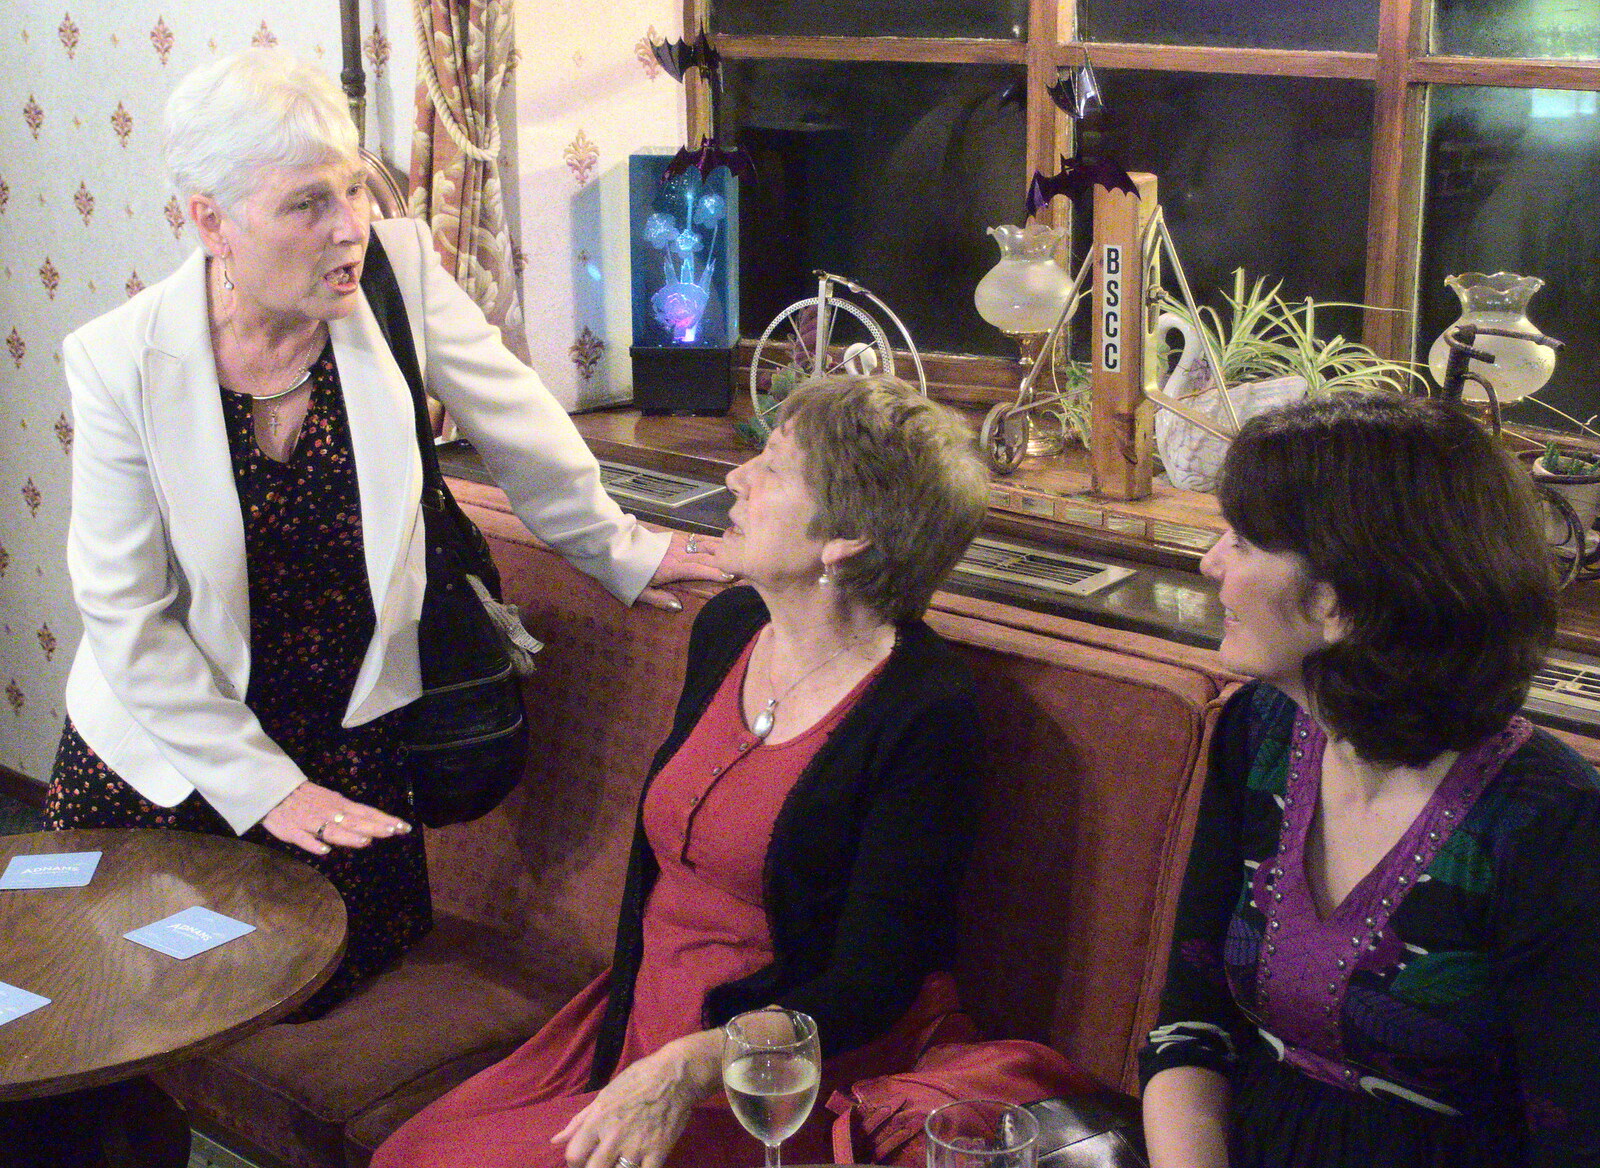 Spammy talks to people from John Willy's 65th and Other Stories, The Swan, Brome, Suffolk - 31st October 2015